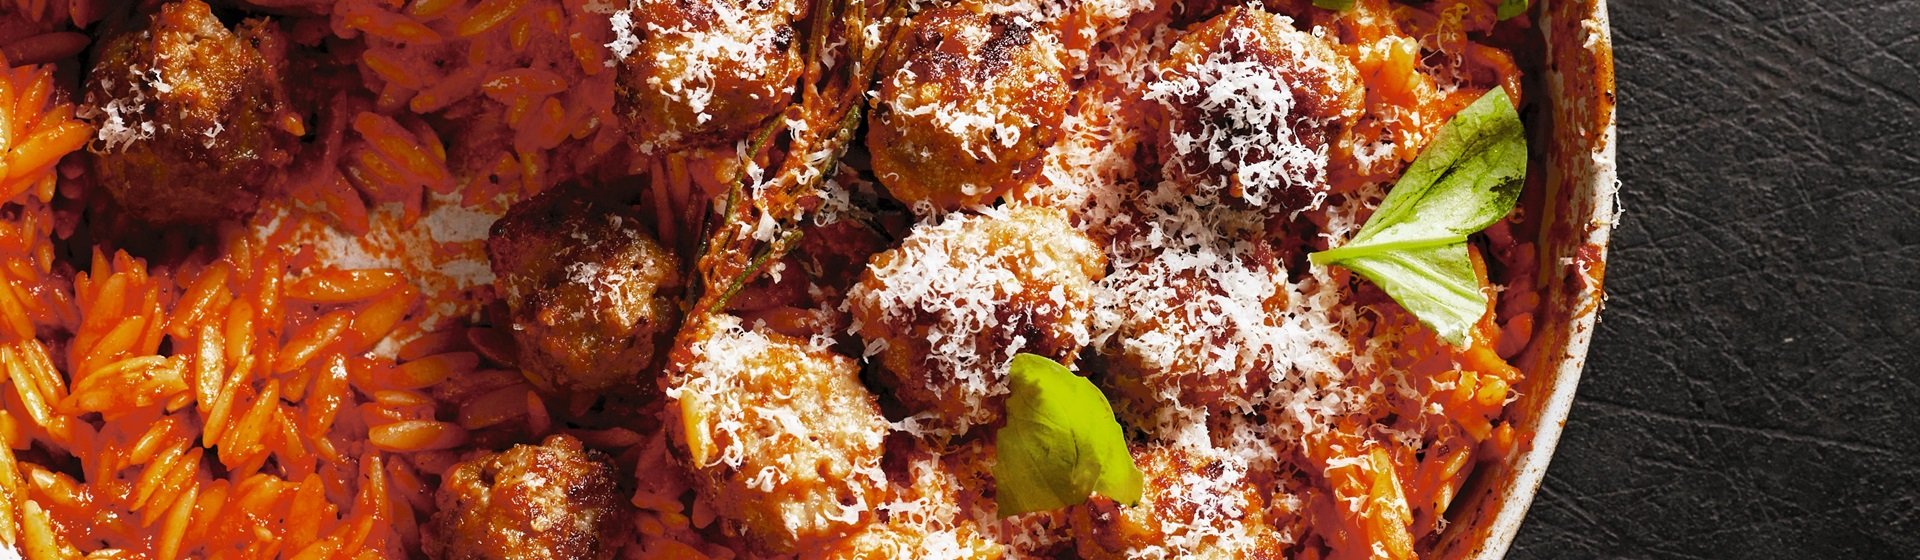 Simple-Suppers-Meatballs-Orzo-Header